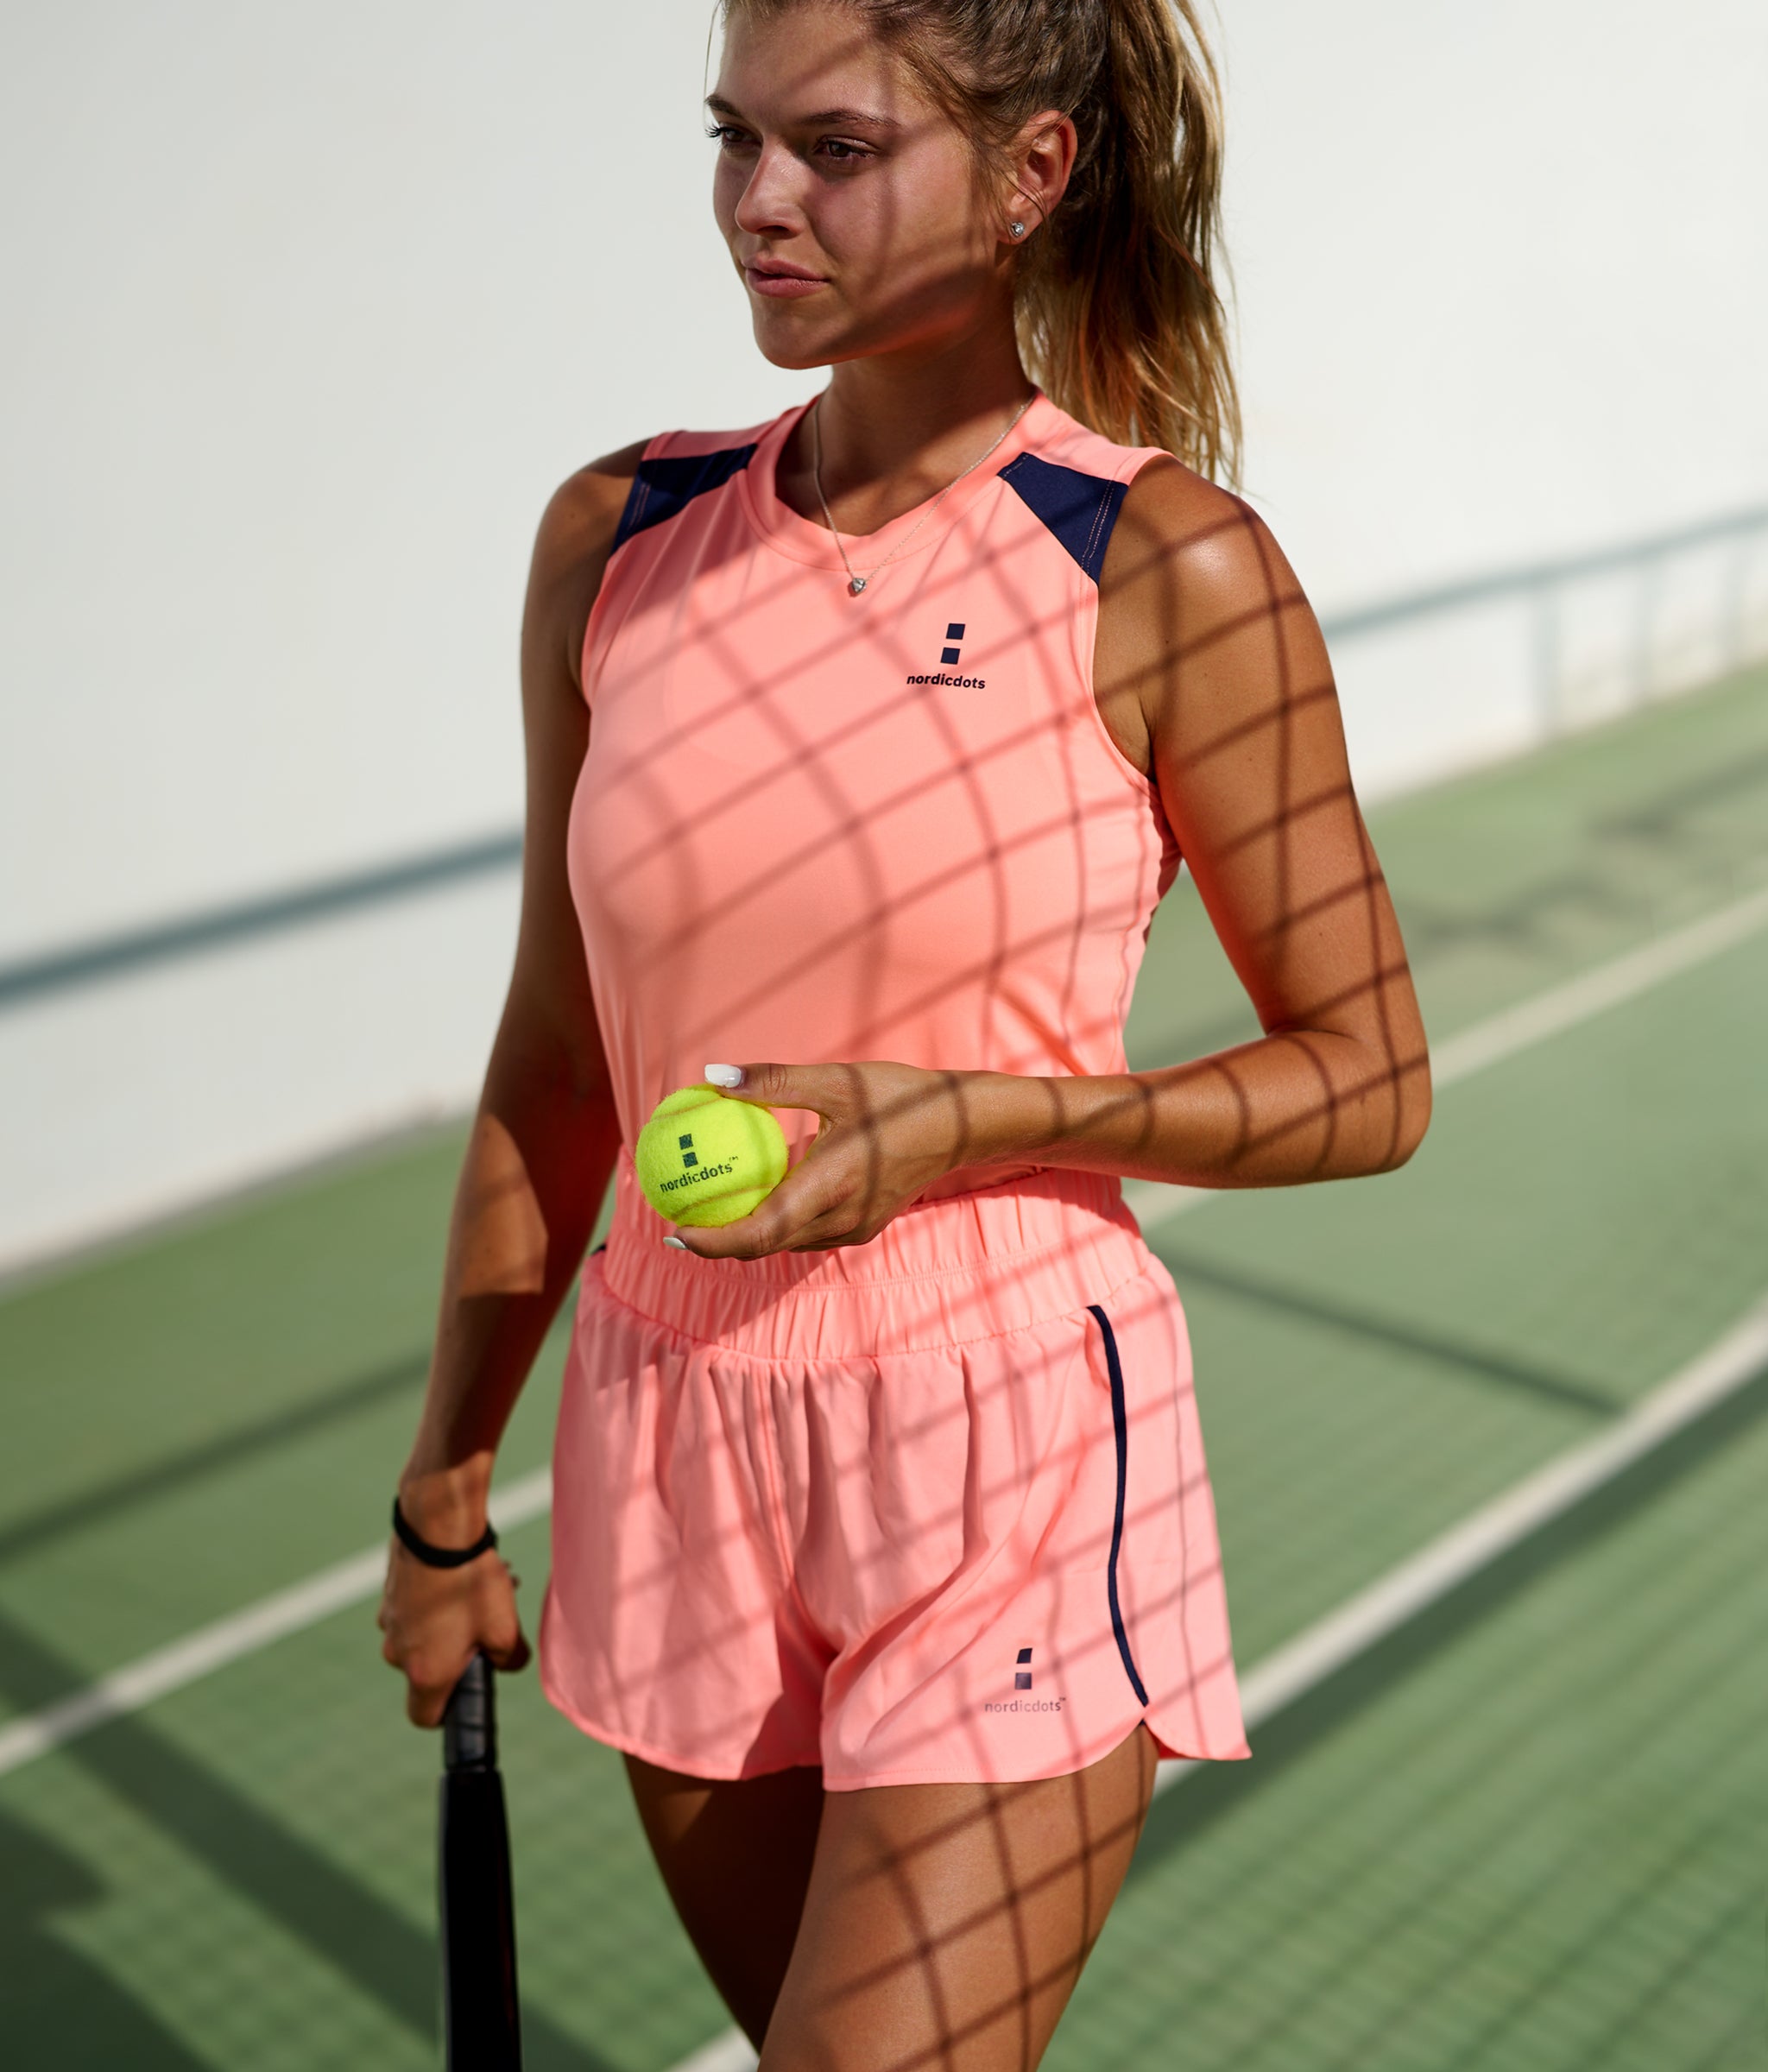 nordicdots tennis padel apparel outfits clothing for women nordicdots.com fitness sportswear